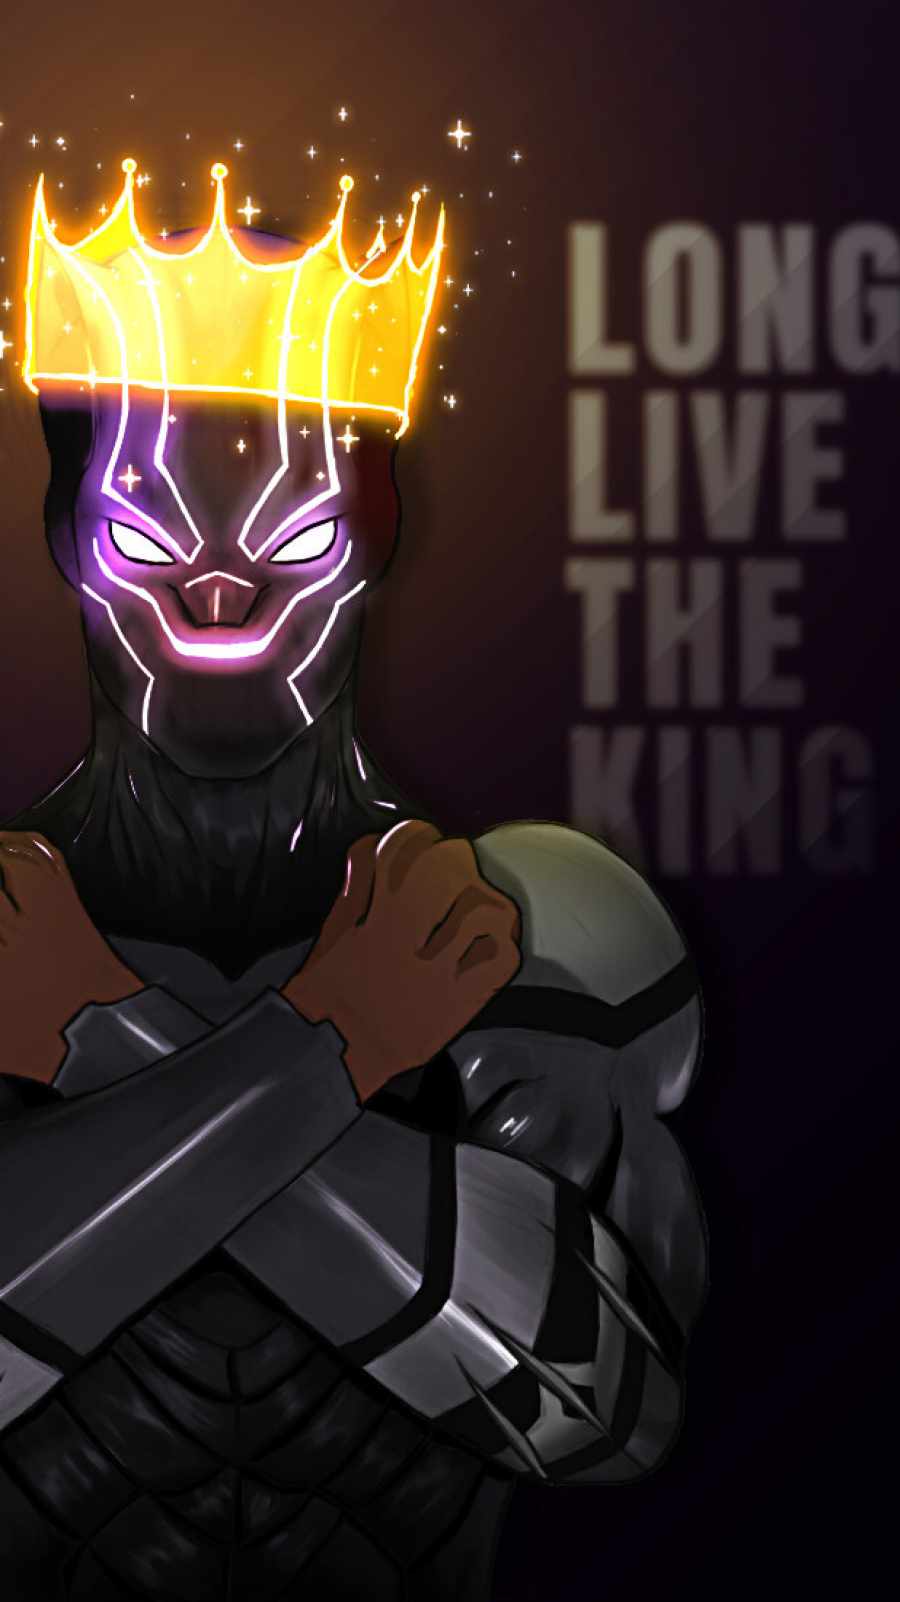 Long Live The King Black Panther IPhone Wallpaper HD - IPhone Wallpapers :  iPhone Wallpapers